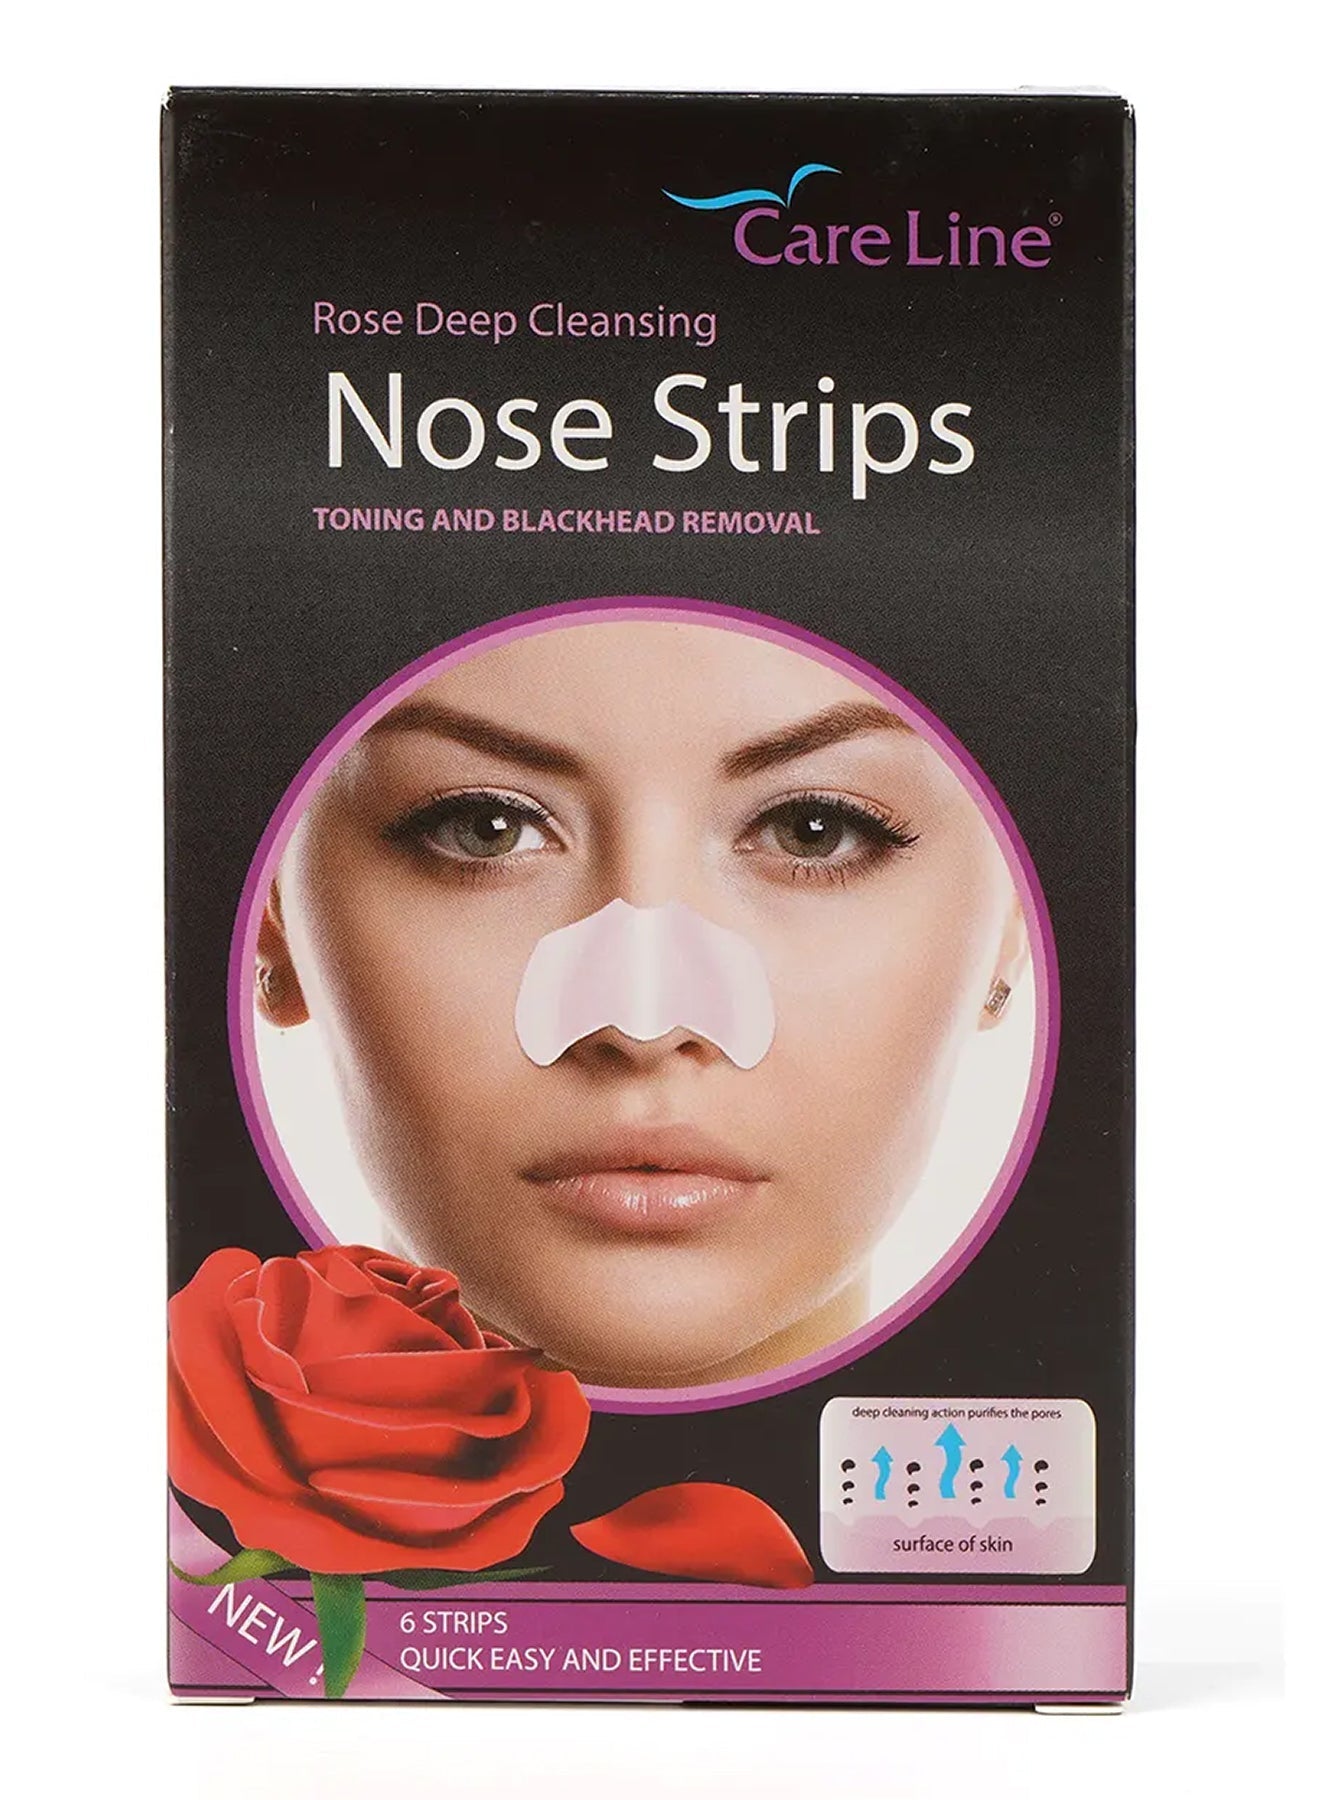 Care Line Nose Strips 6 Strips Rose Deep Cleansing 1pc Value Pack of 12 